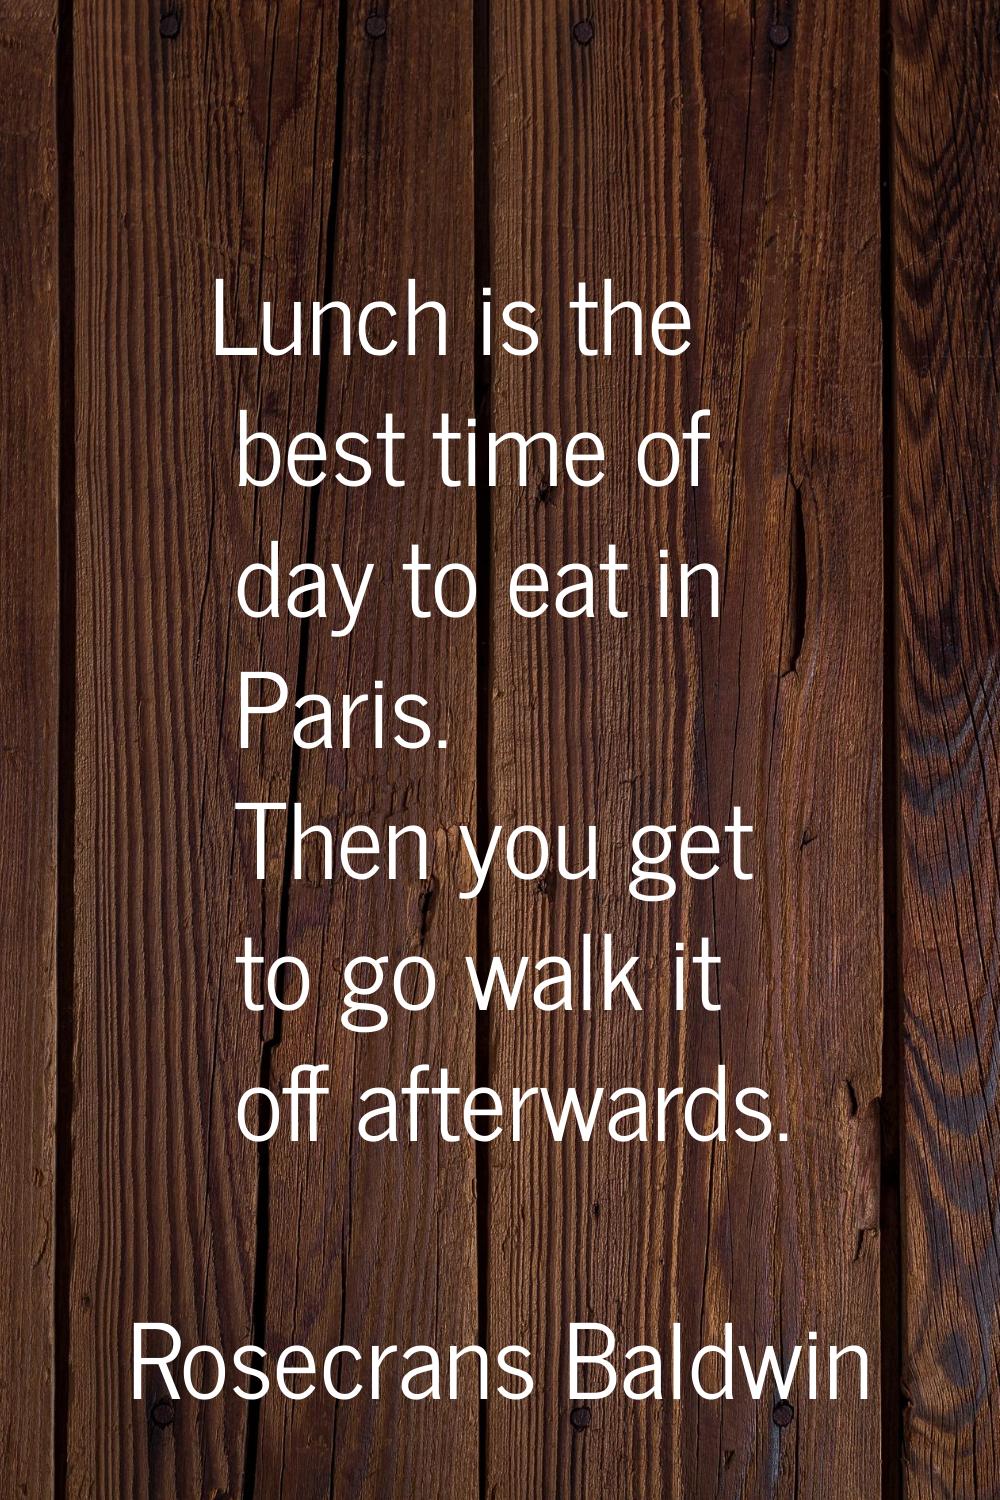 Lunch is the best time of day to eat in Paris. Then you get to go walk it off afterwards.